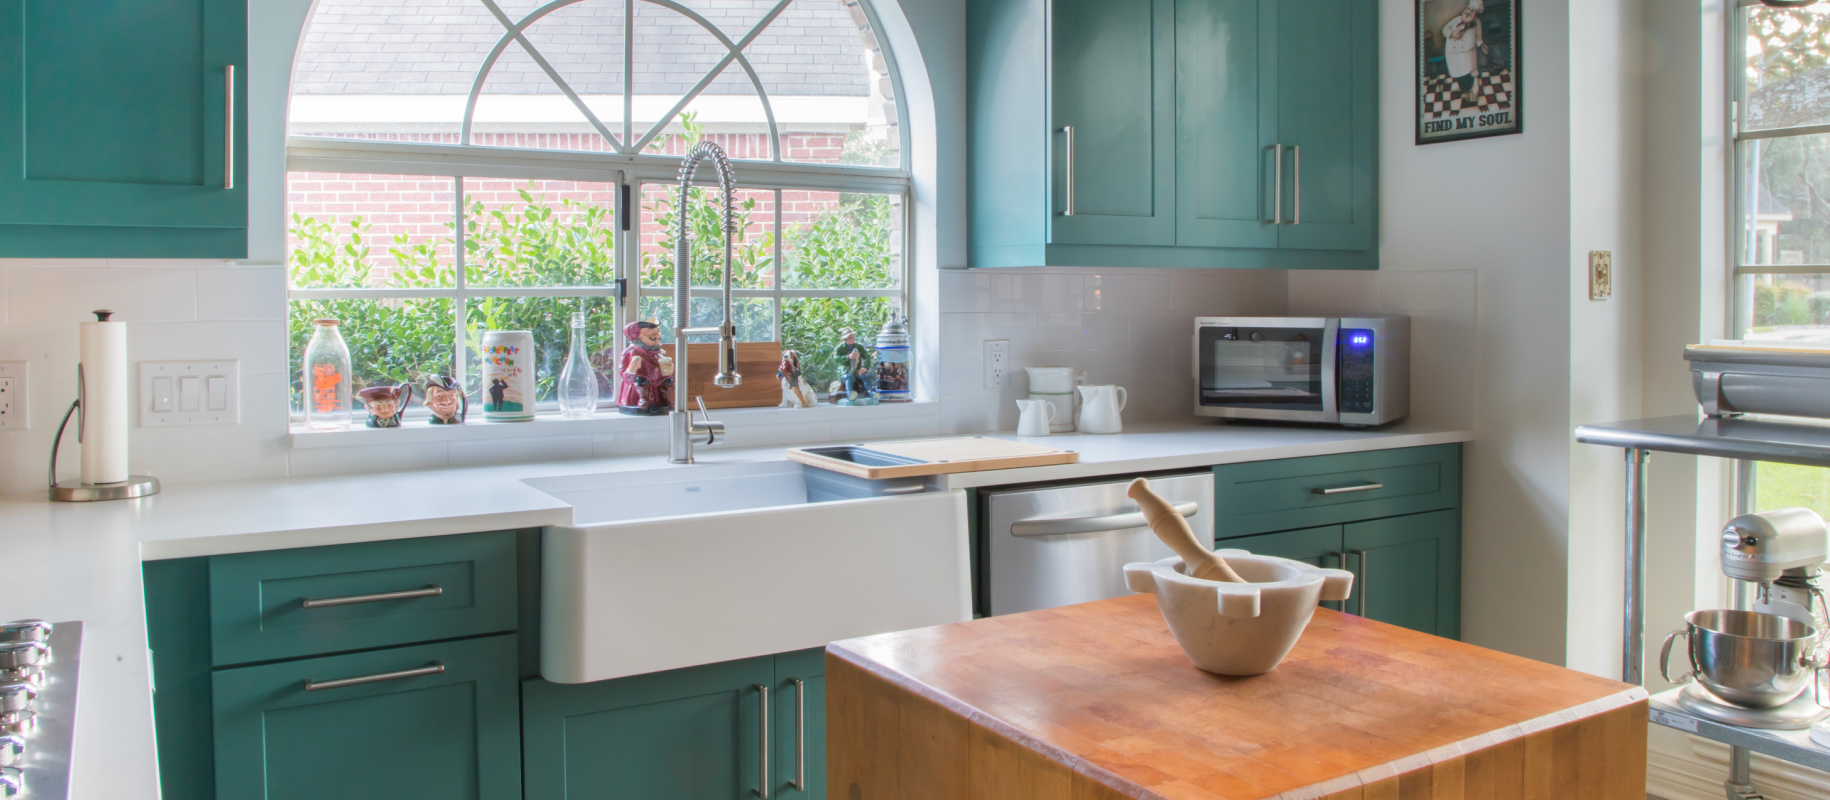 How to Choose the Right Colors for a Two-Toned Kitchen